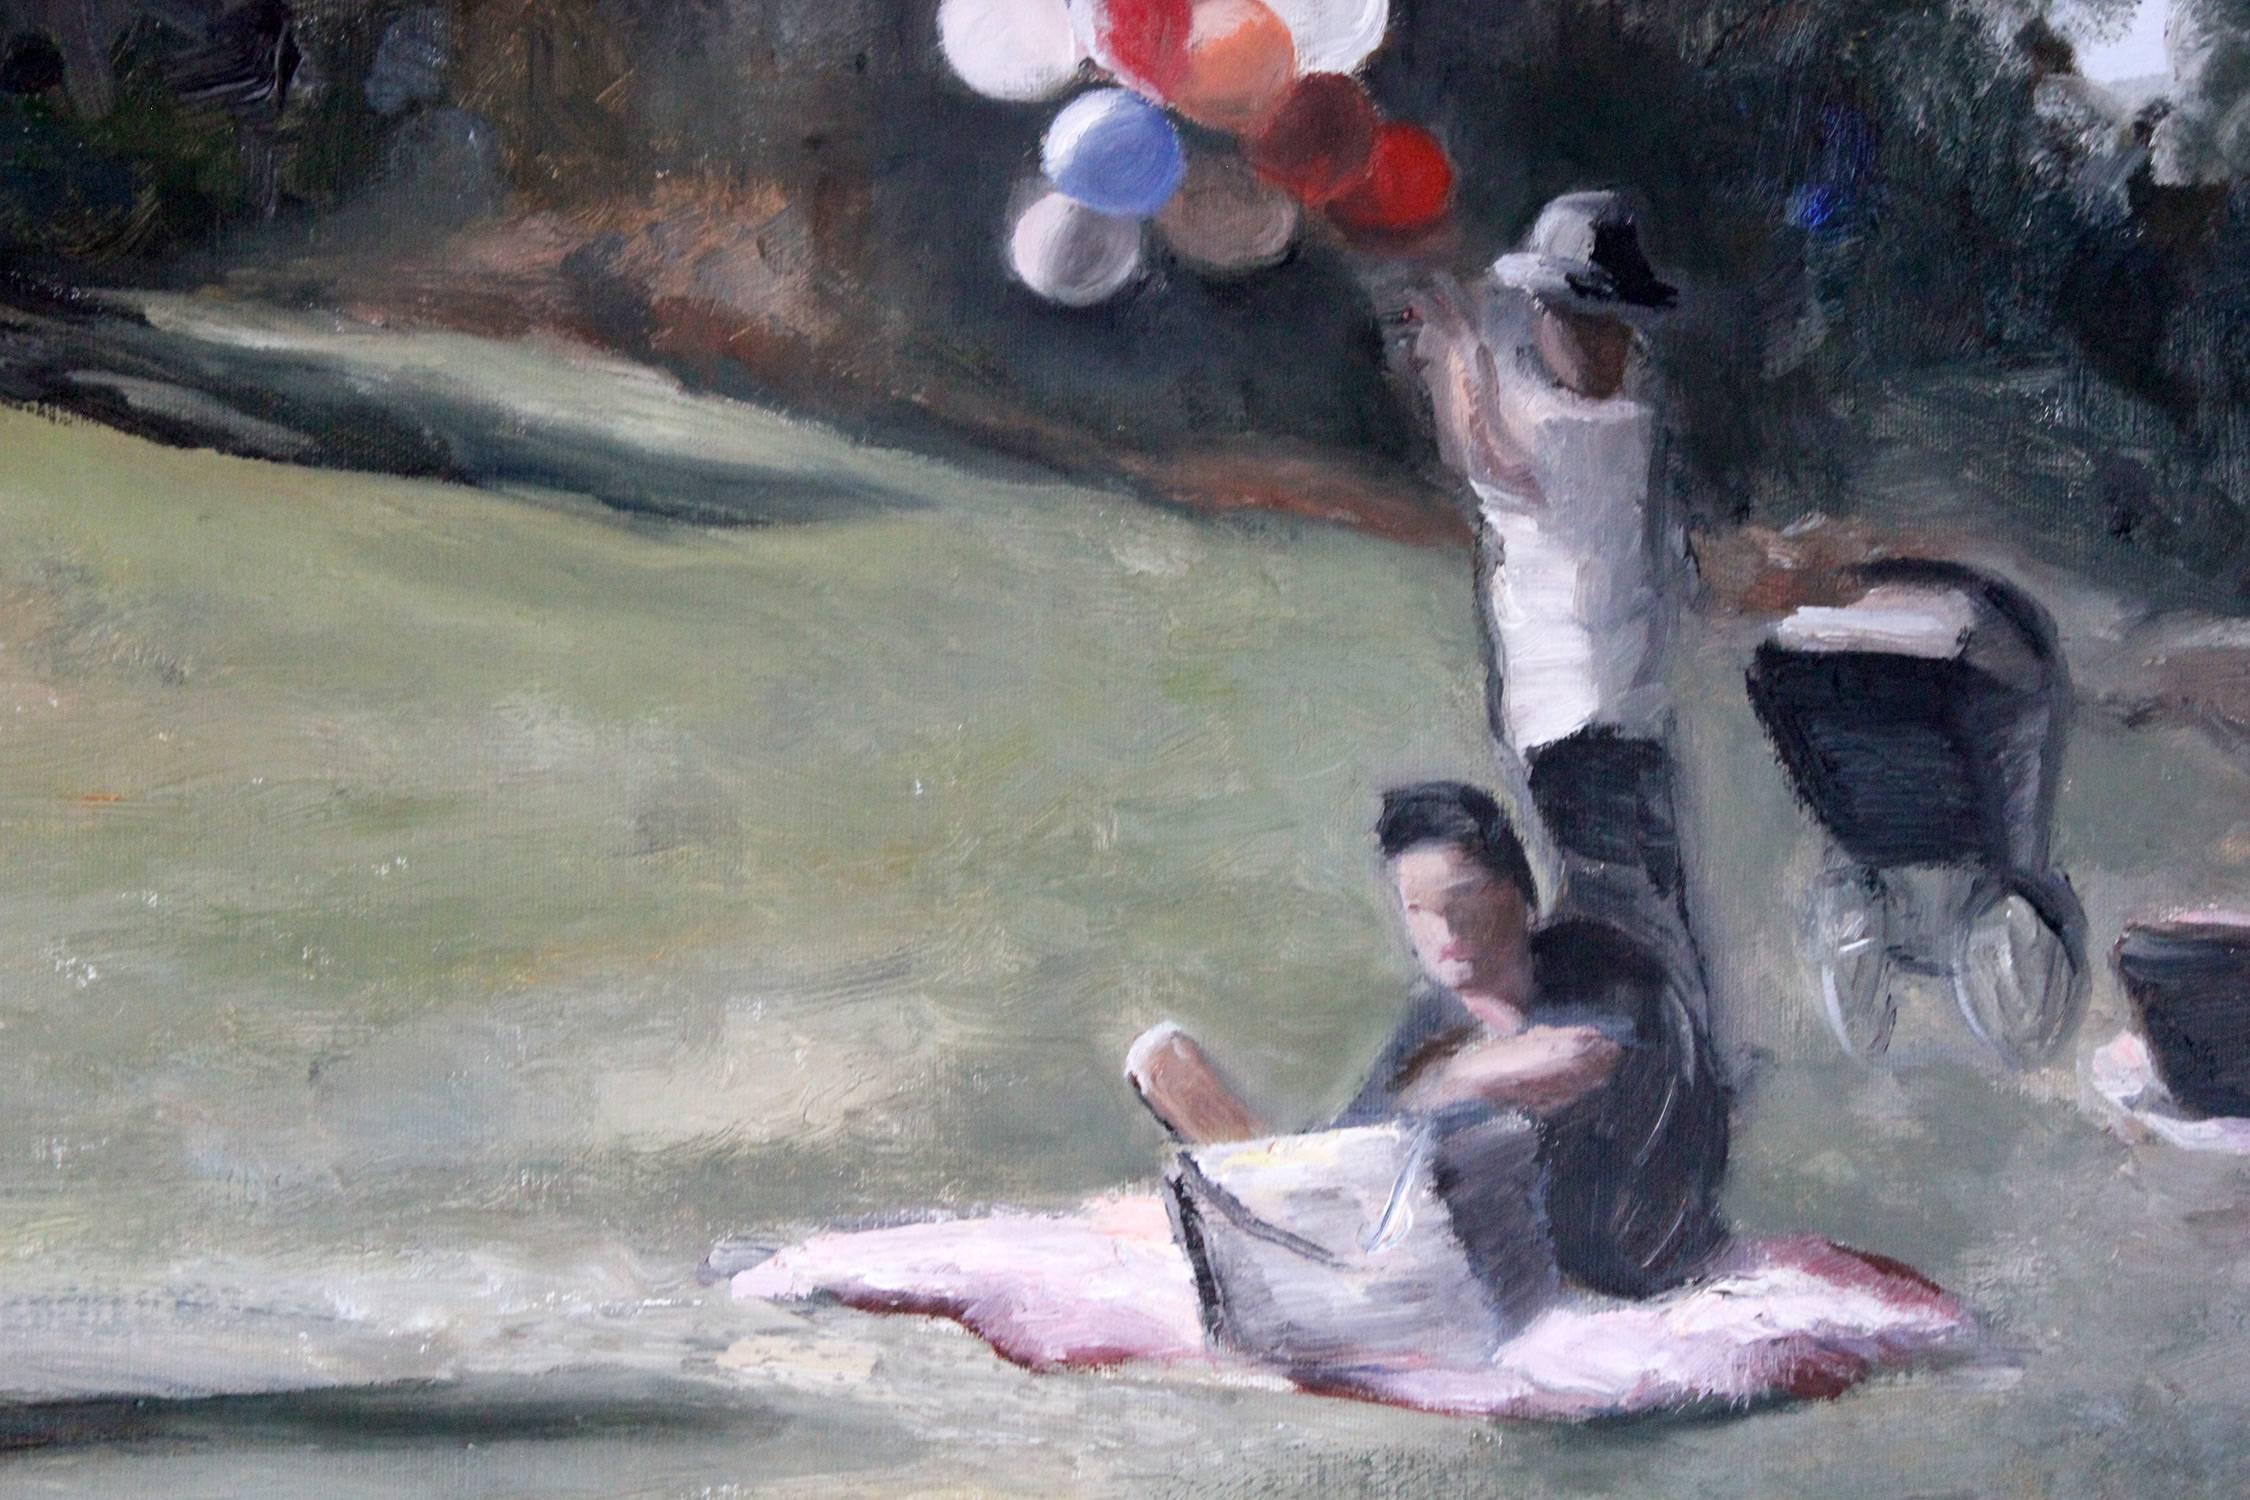 A fun impressionistic scene of a young girl walking toward the viewer in a Parisian park setting. There is a young man pick-nicking watching the woman walking with a couple and baby carriage on the far right. There is a balloon seller in the